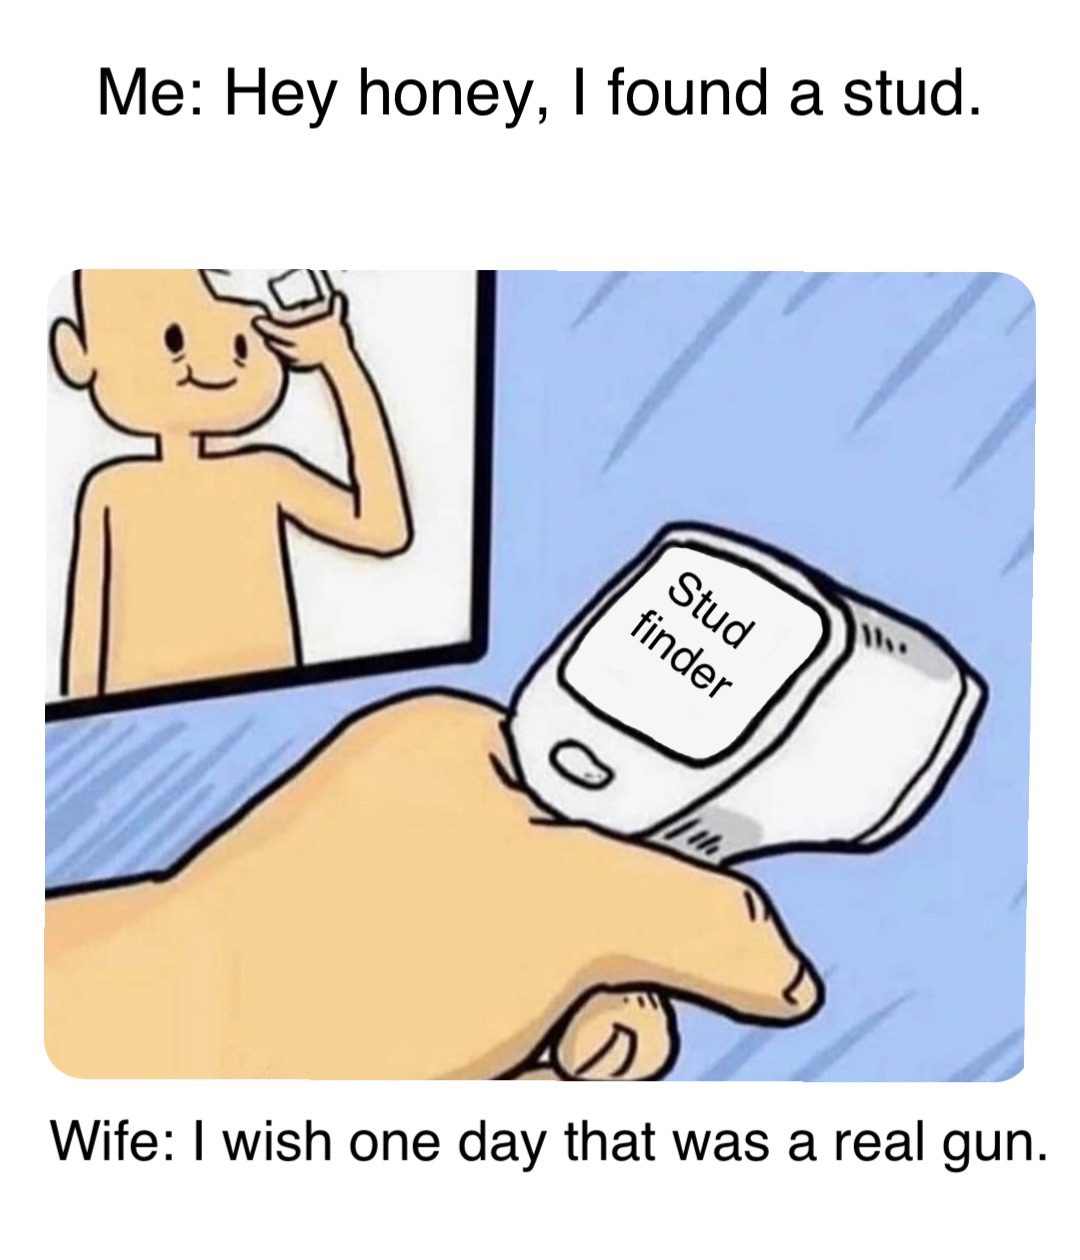 Me: Hey honey, I found a stud. Stud
 finder Wife: I wish one day that was a real gun.